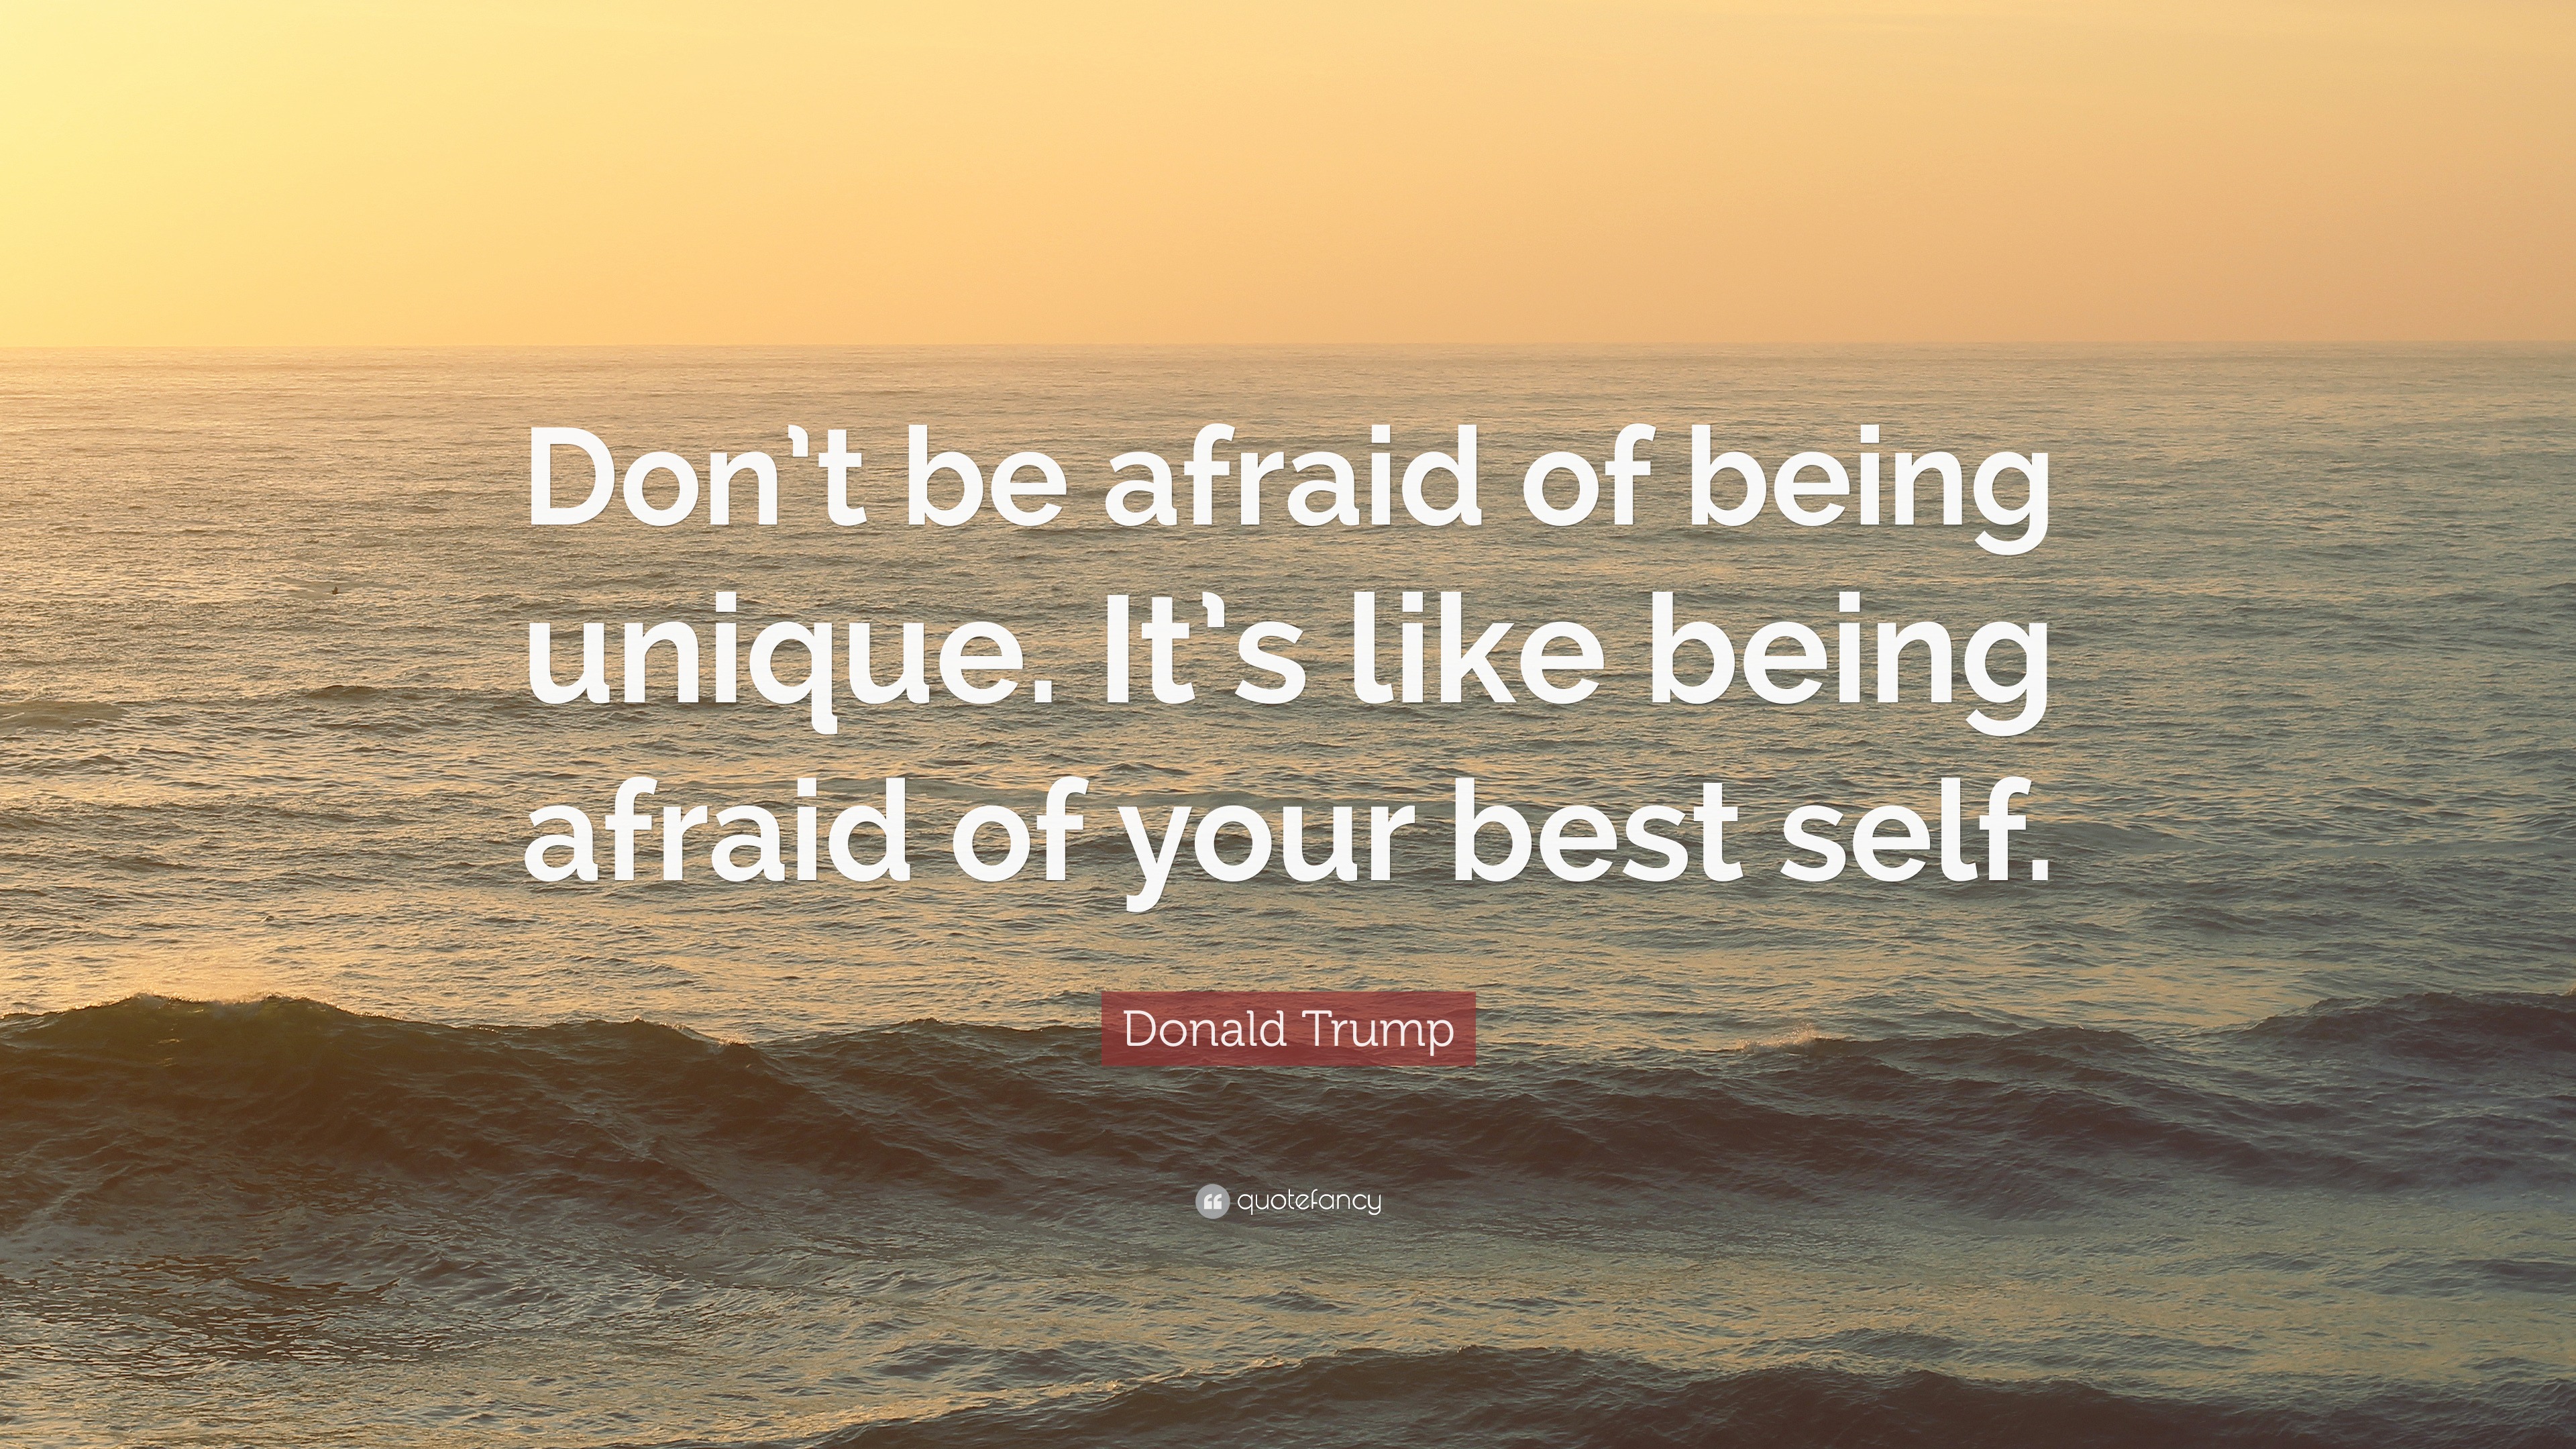 Donald Trump Quote  Don t be afraid of being unique  It s 